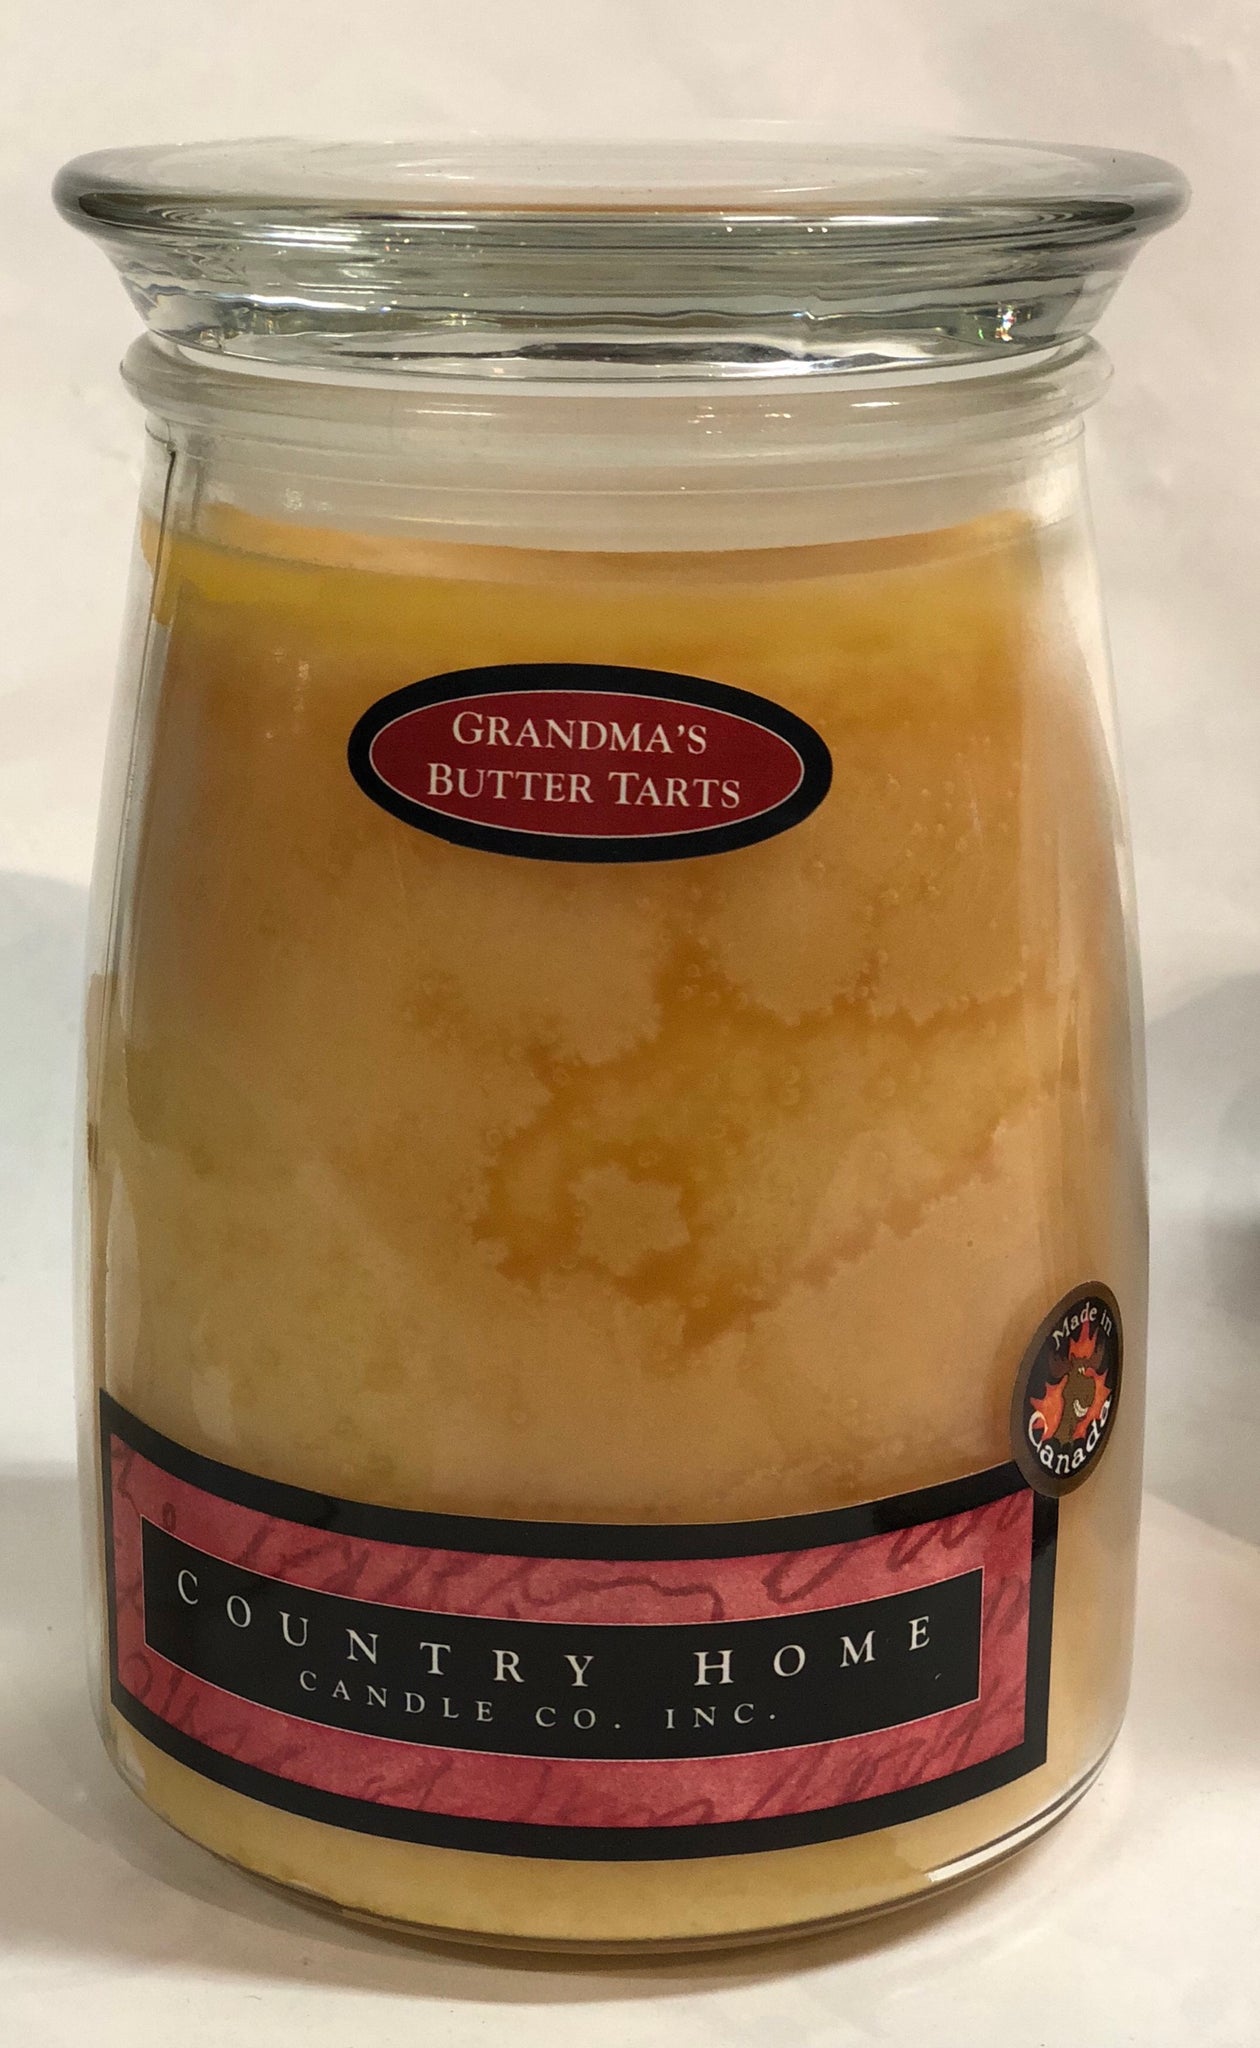 Country Home Jar Candle - Grandma's Butter Tarts